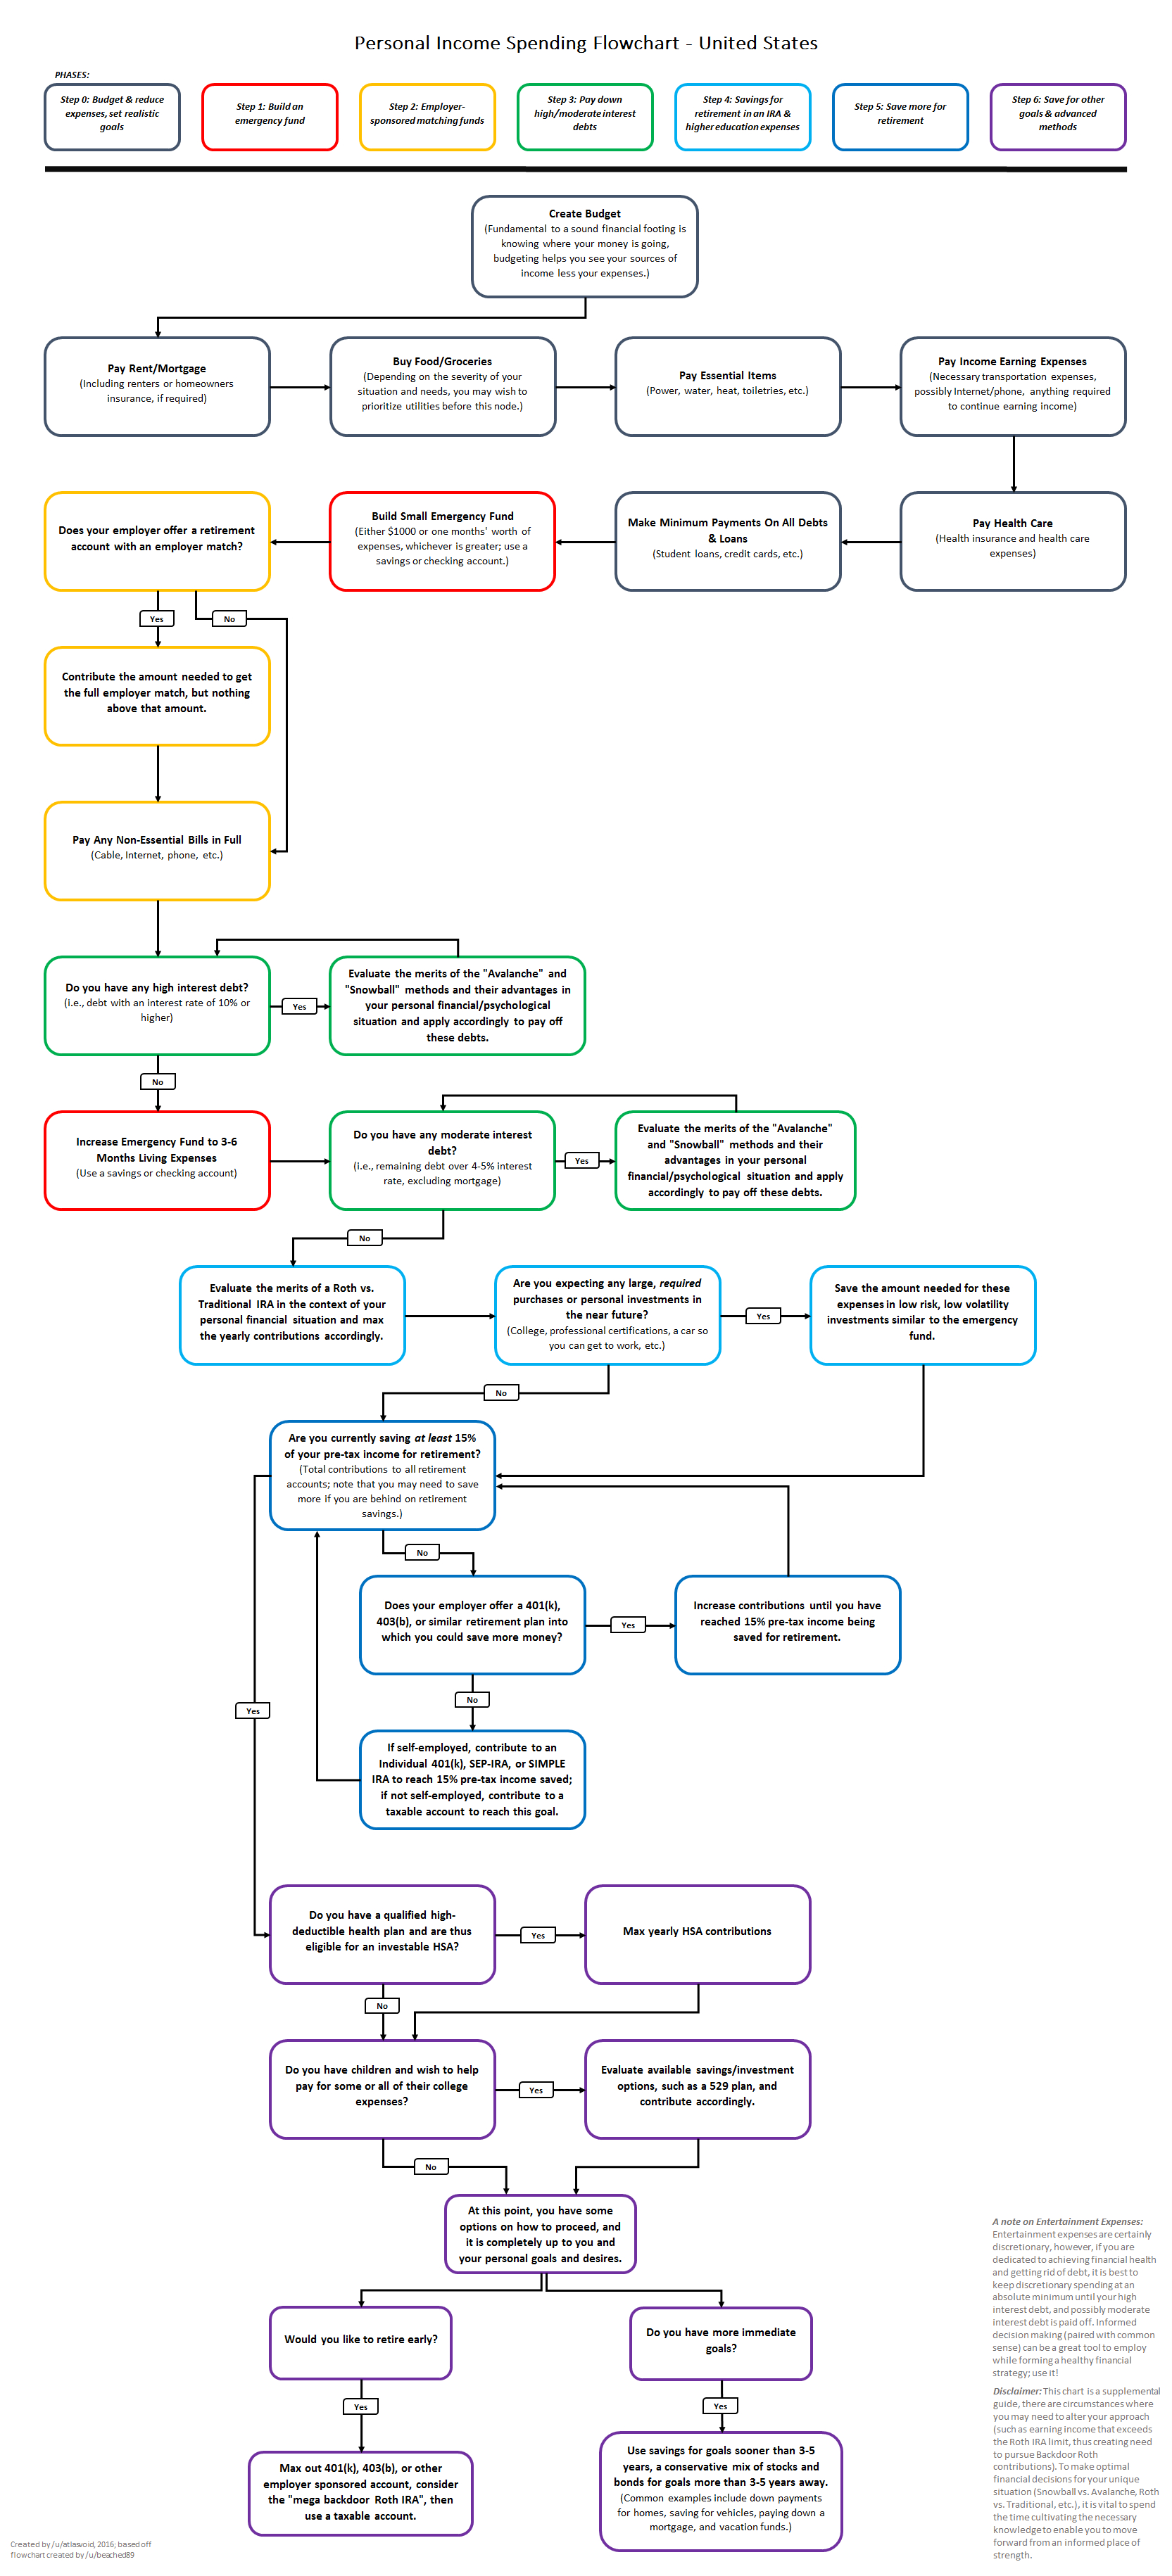 personal income spending flowchart